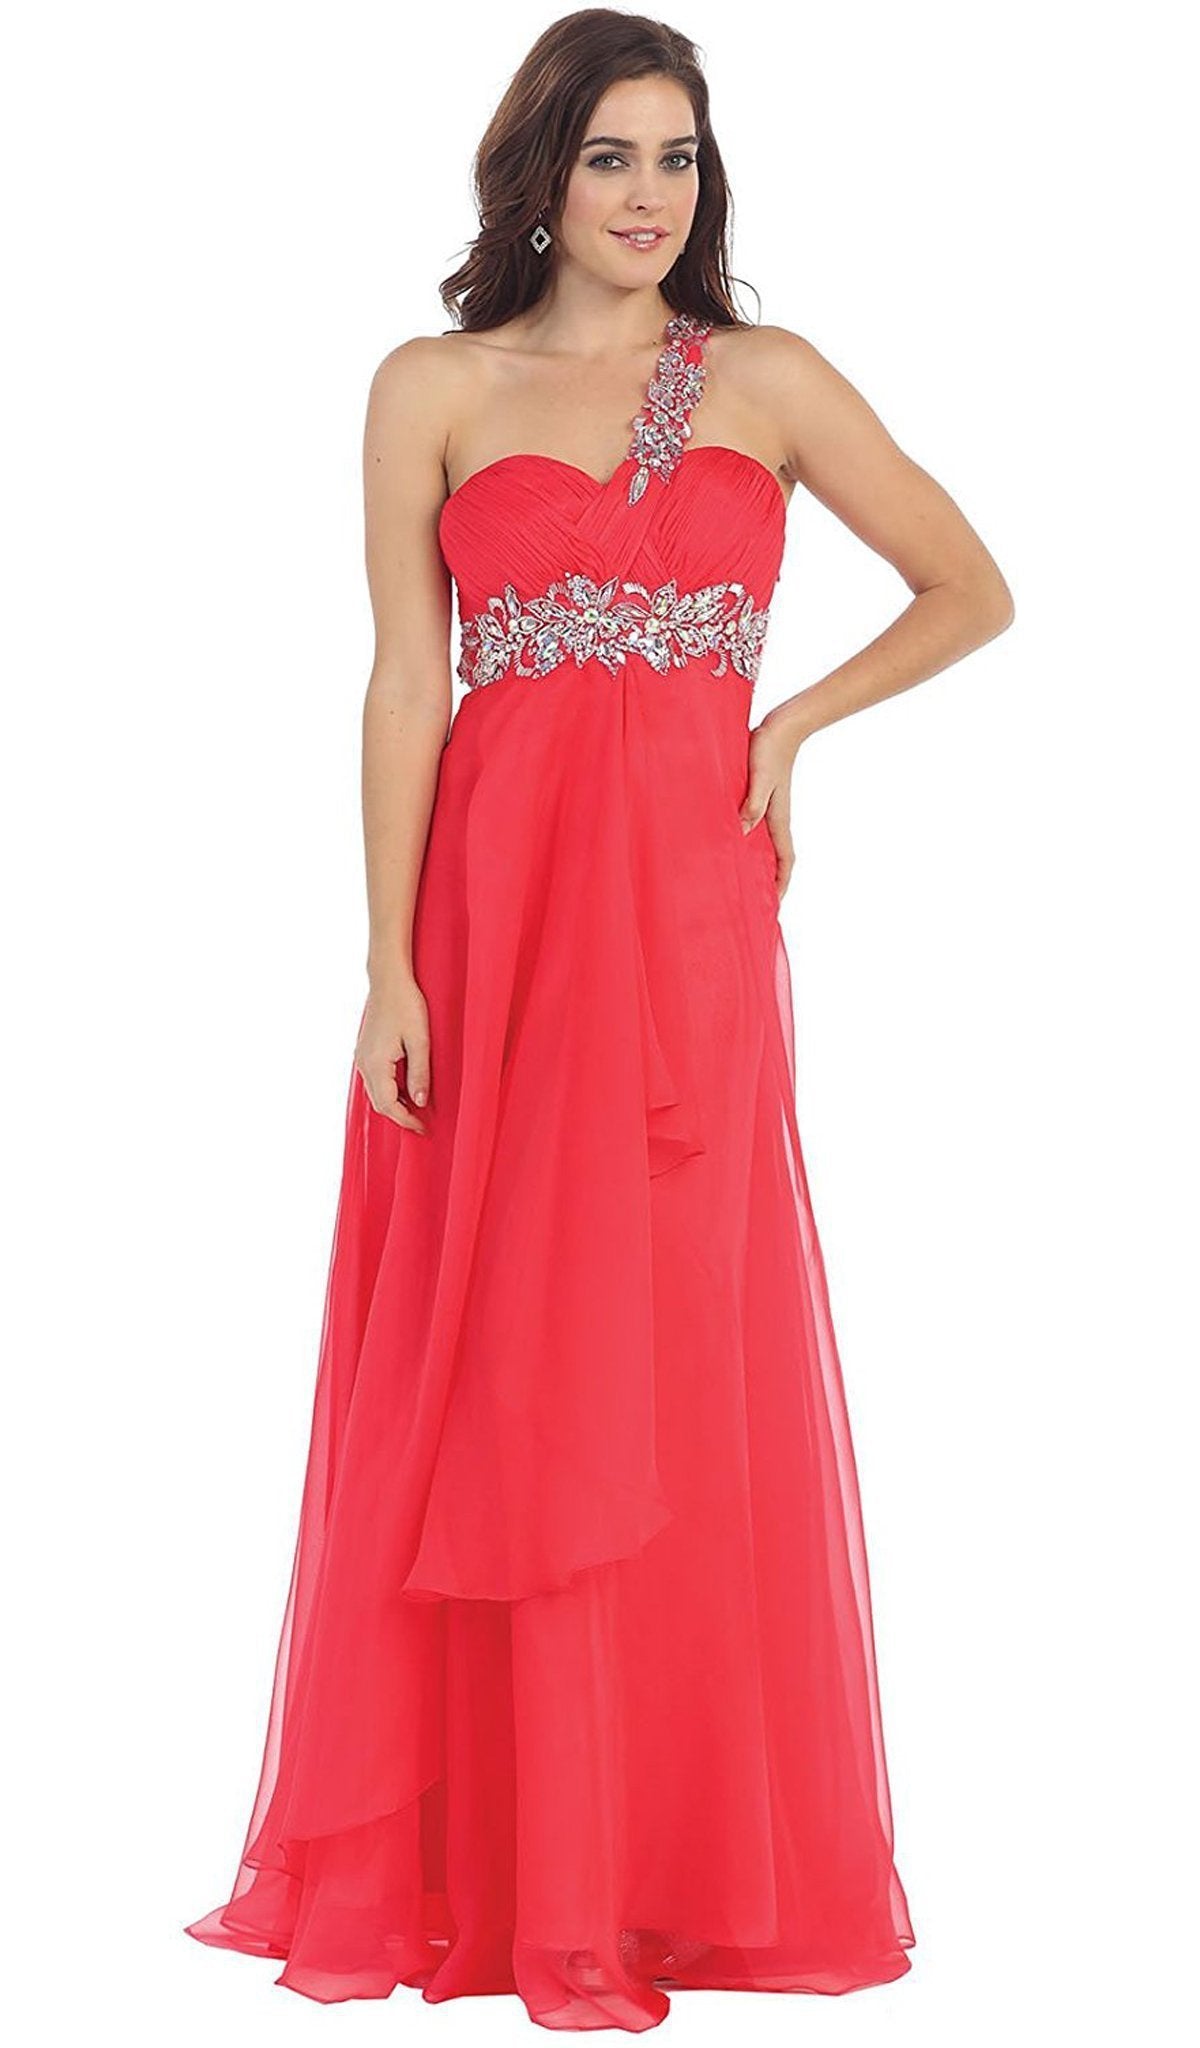 May Queen - MQ1028 Ornate Strap Ruched Sweetheart A-line Prom Dress Special Occasion Dress 4 / Coral